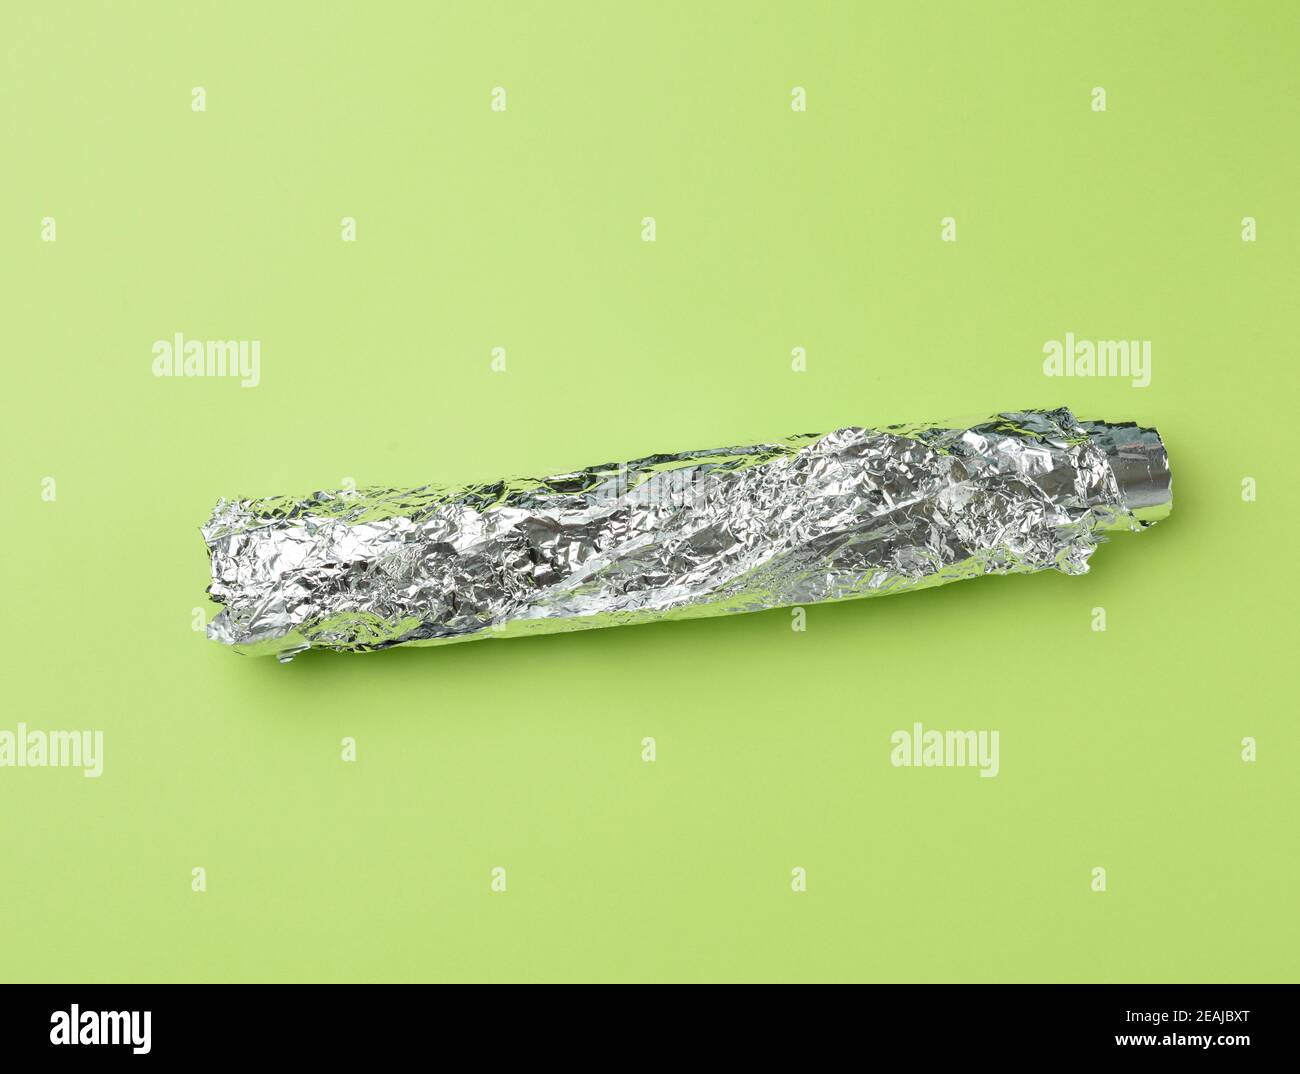 https://c8.alamy.com/comp/2EAJBXT/roll-of-gray-foil-for-baking-and-packaging-food-on-a-green-background-2EAJBXT.jpg